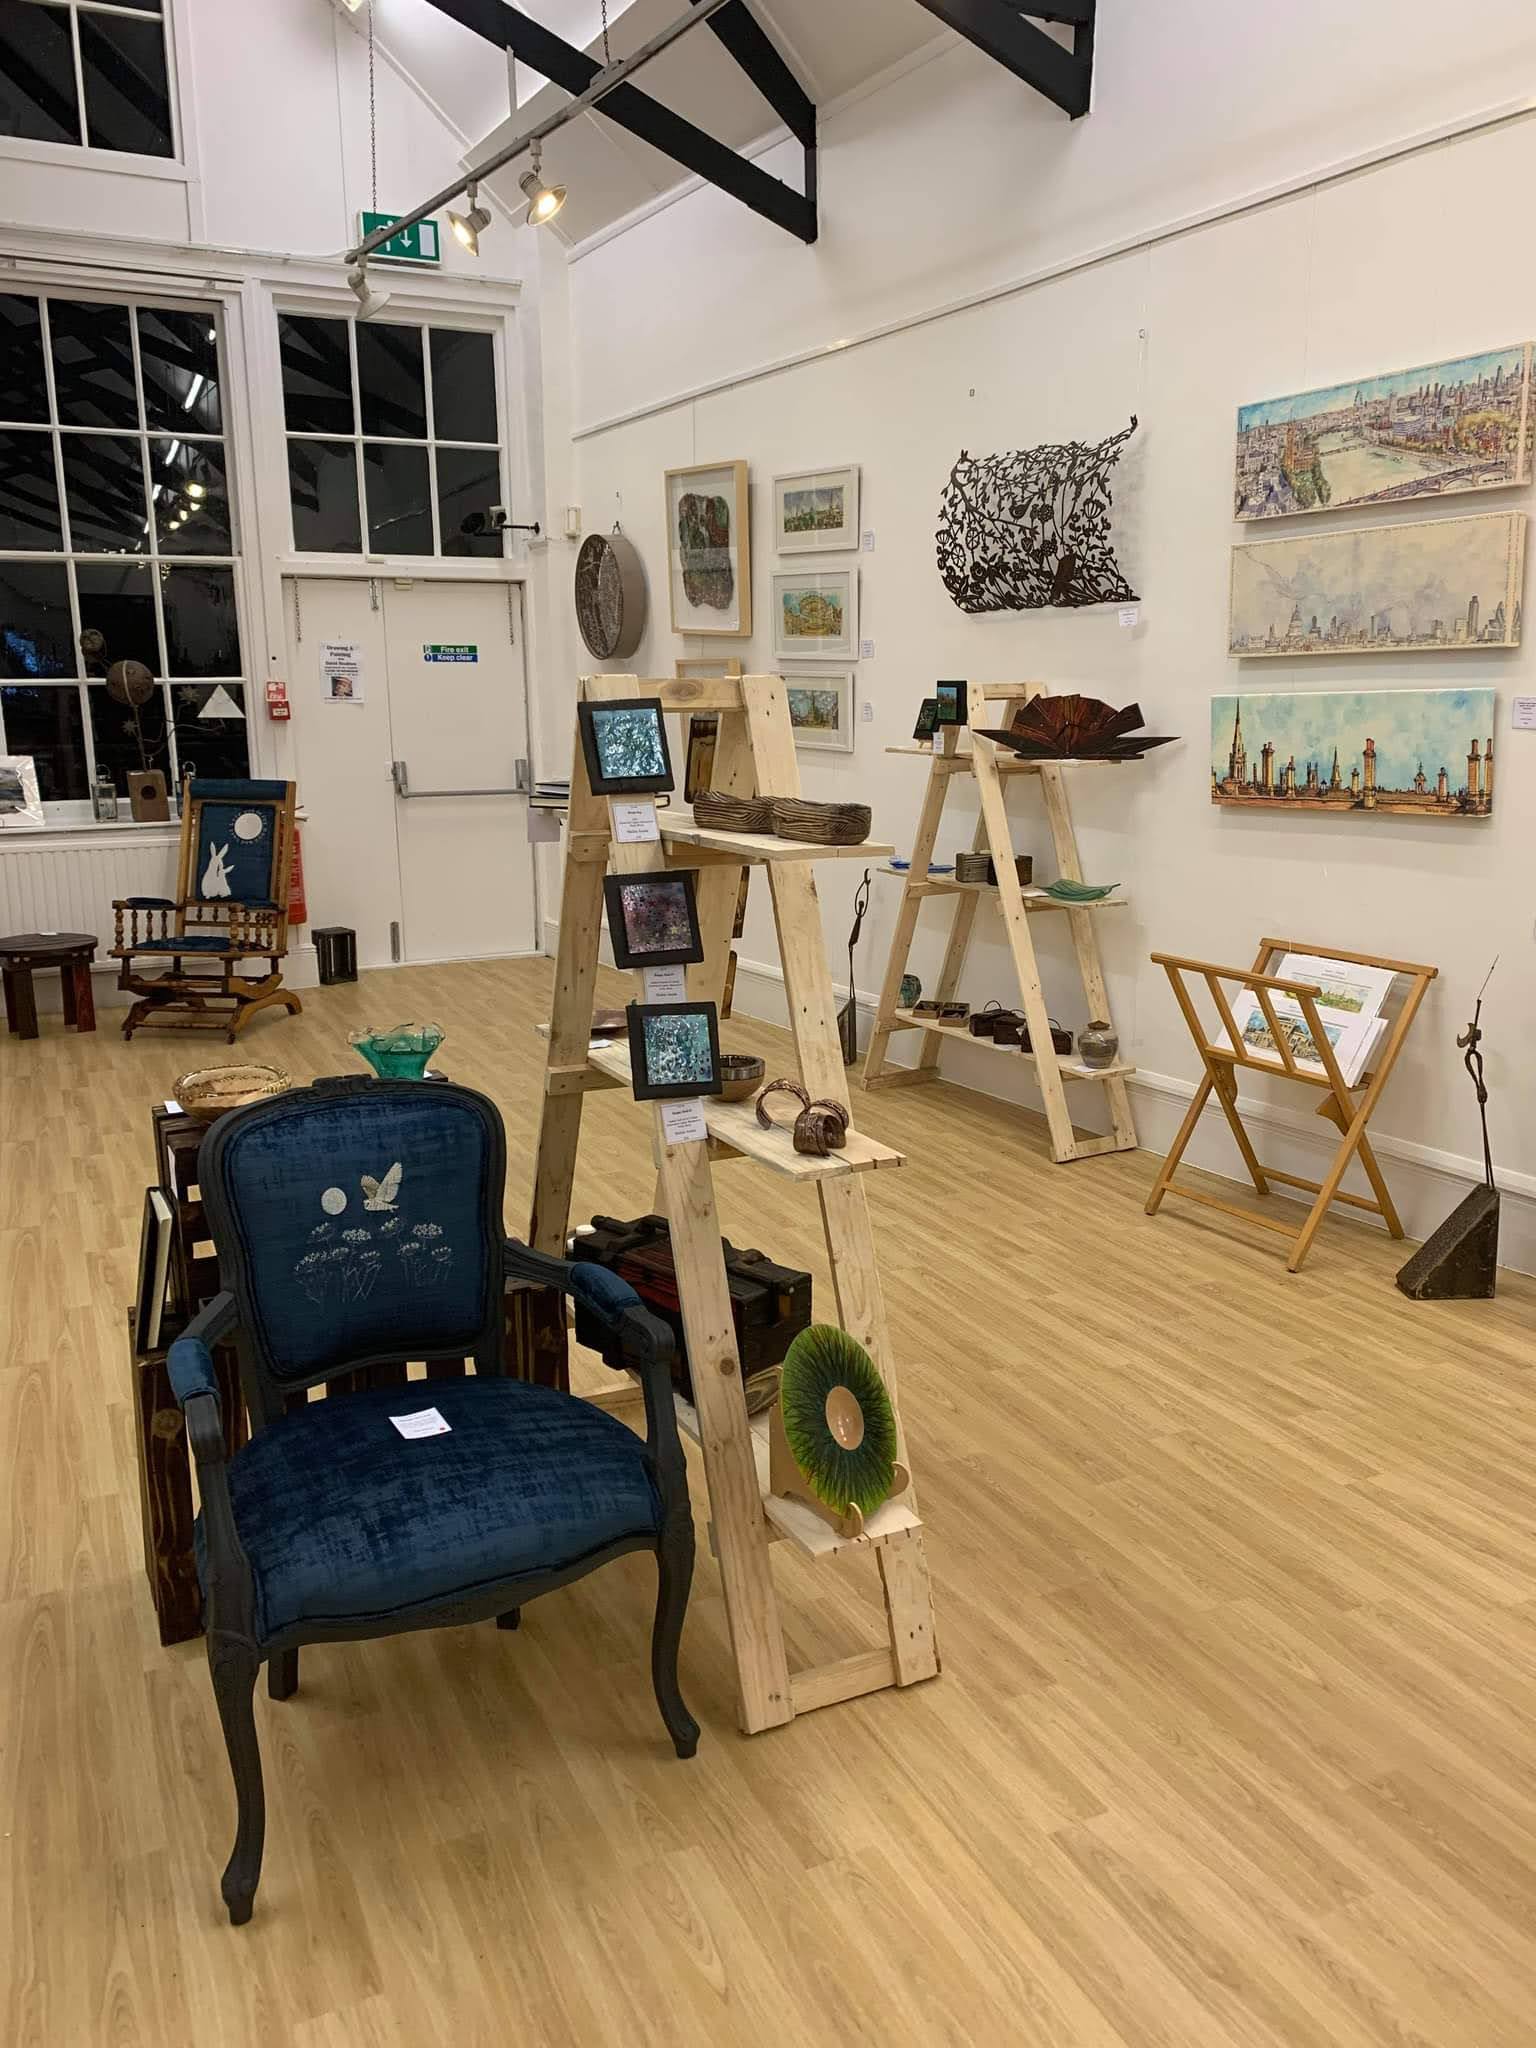 ESC Artists 2021 Exhibition at Stamford Arts Centre